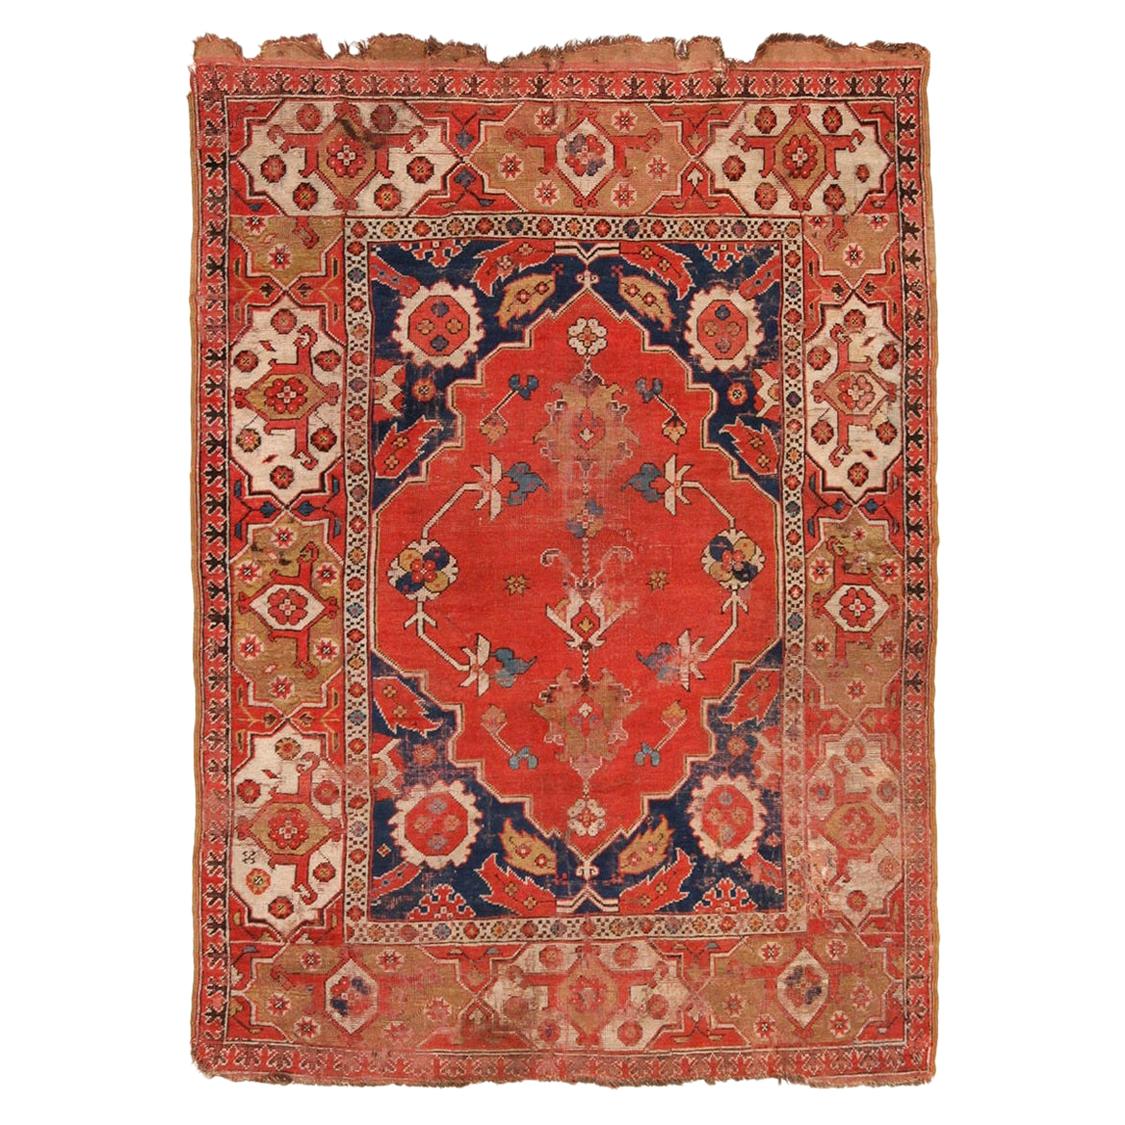 Nazmiyal Antique 17th Century Transylvanian Rug. 3 ft 10 in x 5 ft 3 in 